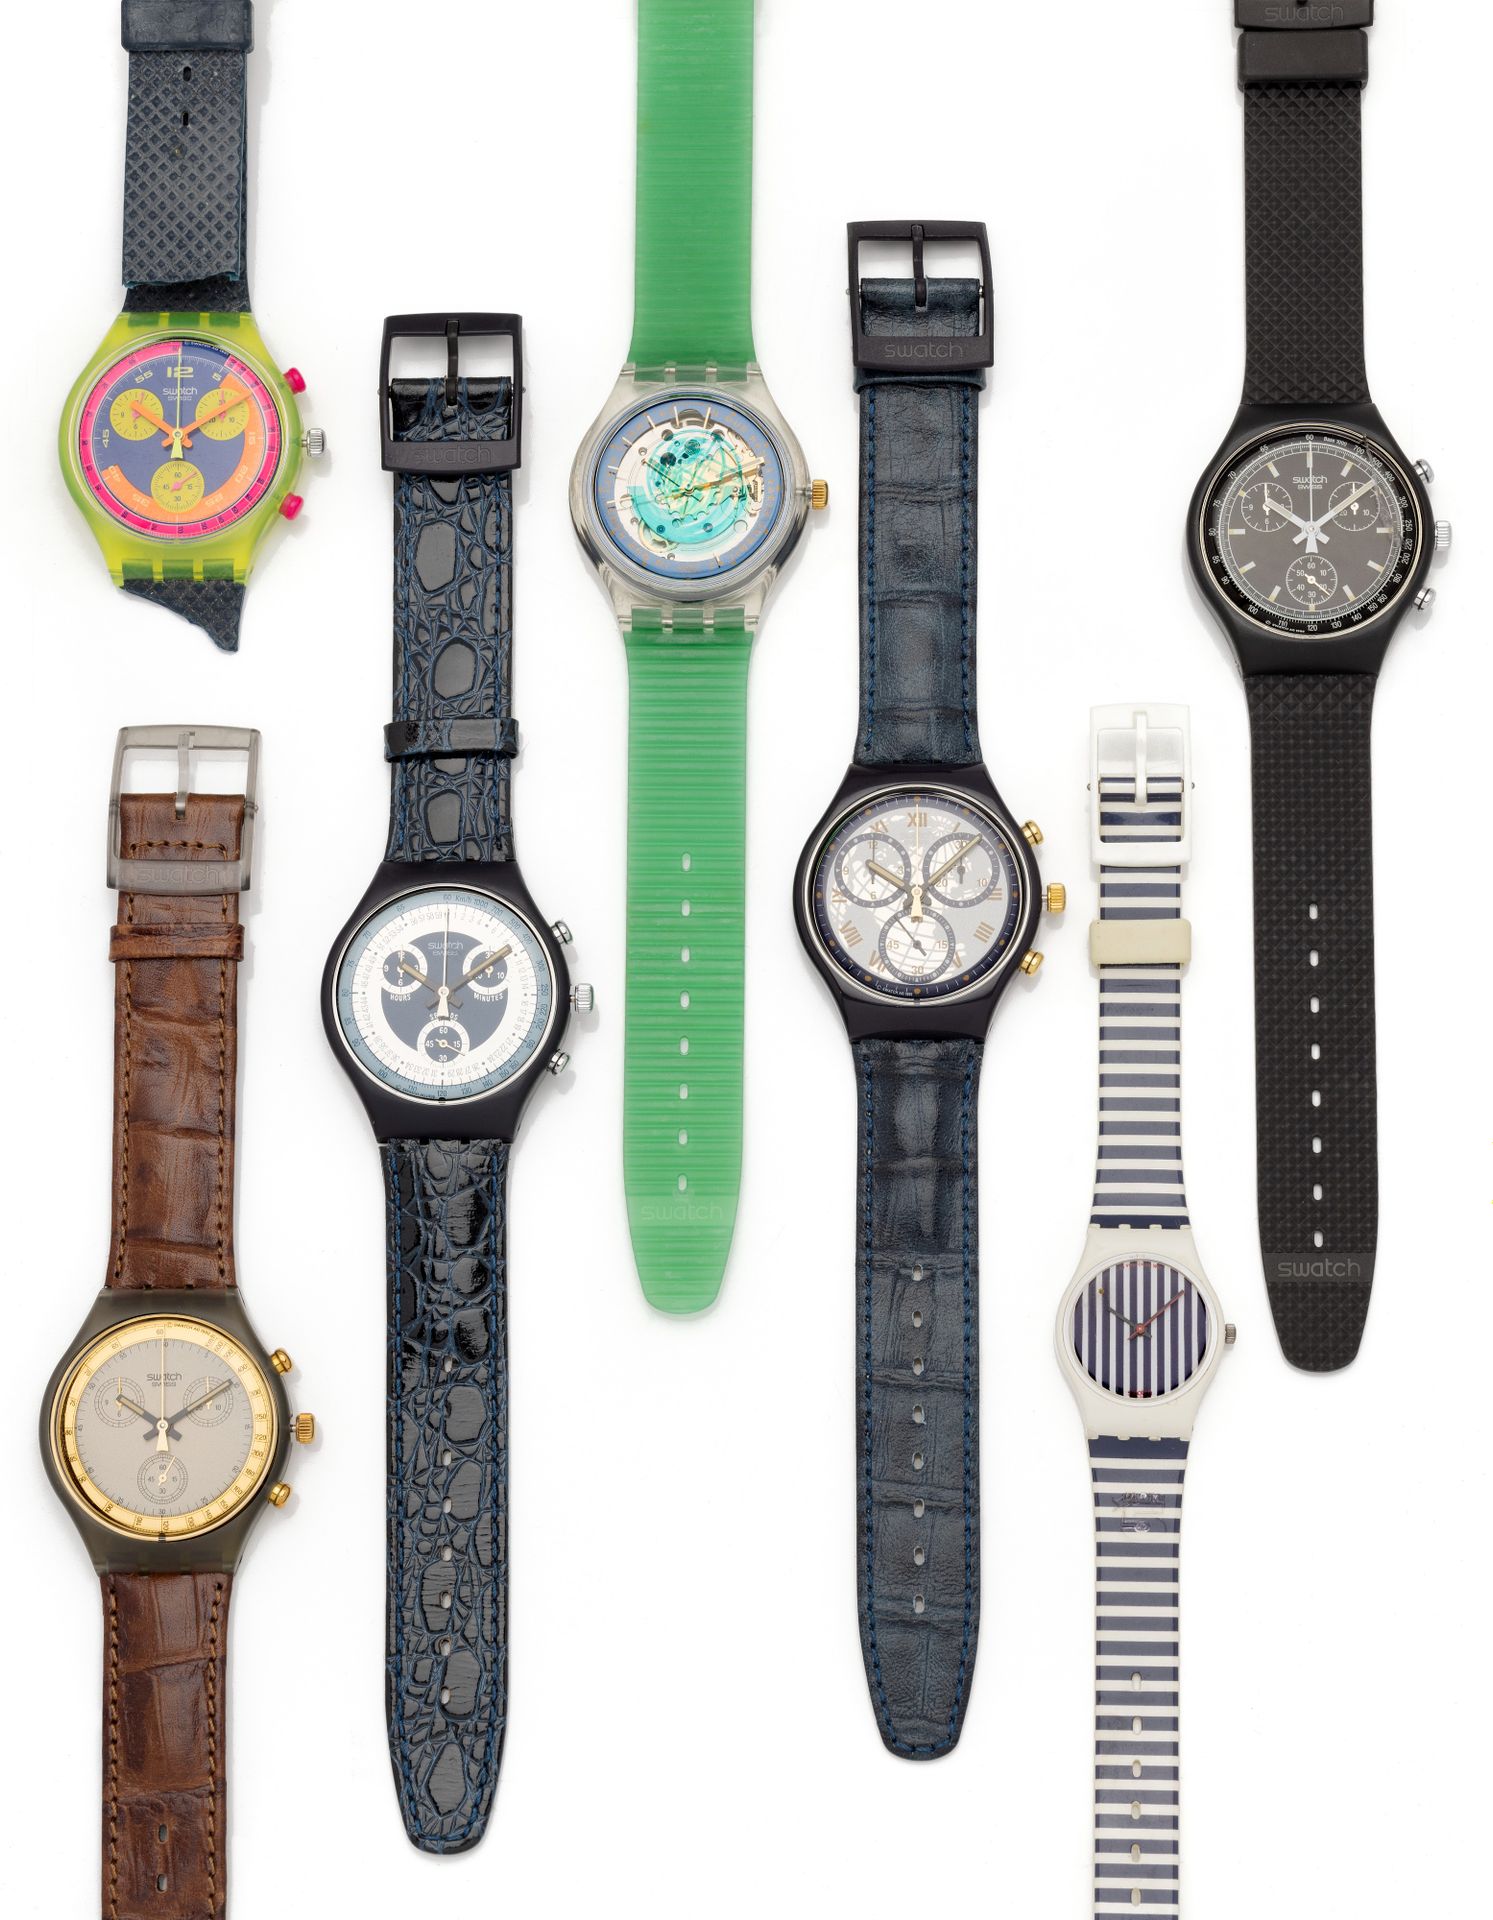 Null LOT OF SWATCH WATCHES
Lot of Swatch watches including seven watches of whic&hellip;